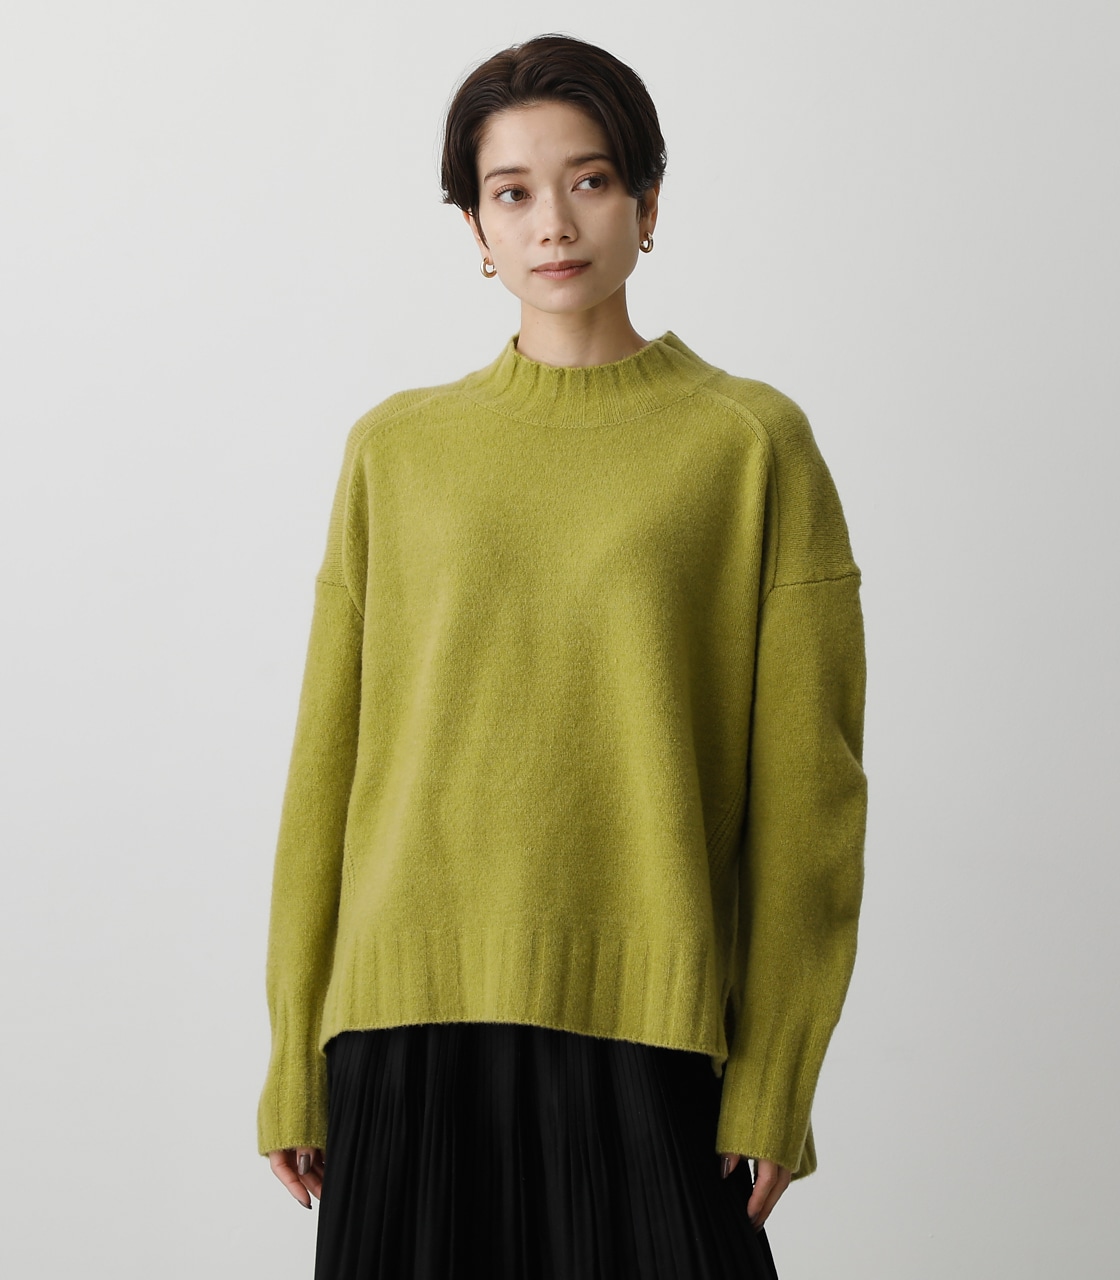 SOFT TOUCH HIGH NECK KNIT TOPS/ソフトタッチハイネックニットトップス 詳細画像 LIME 5